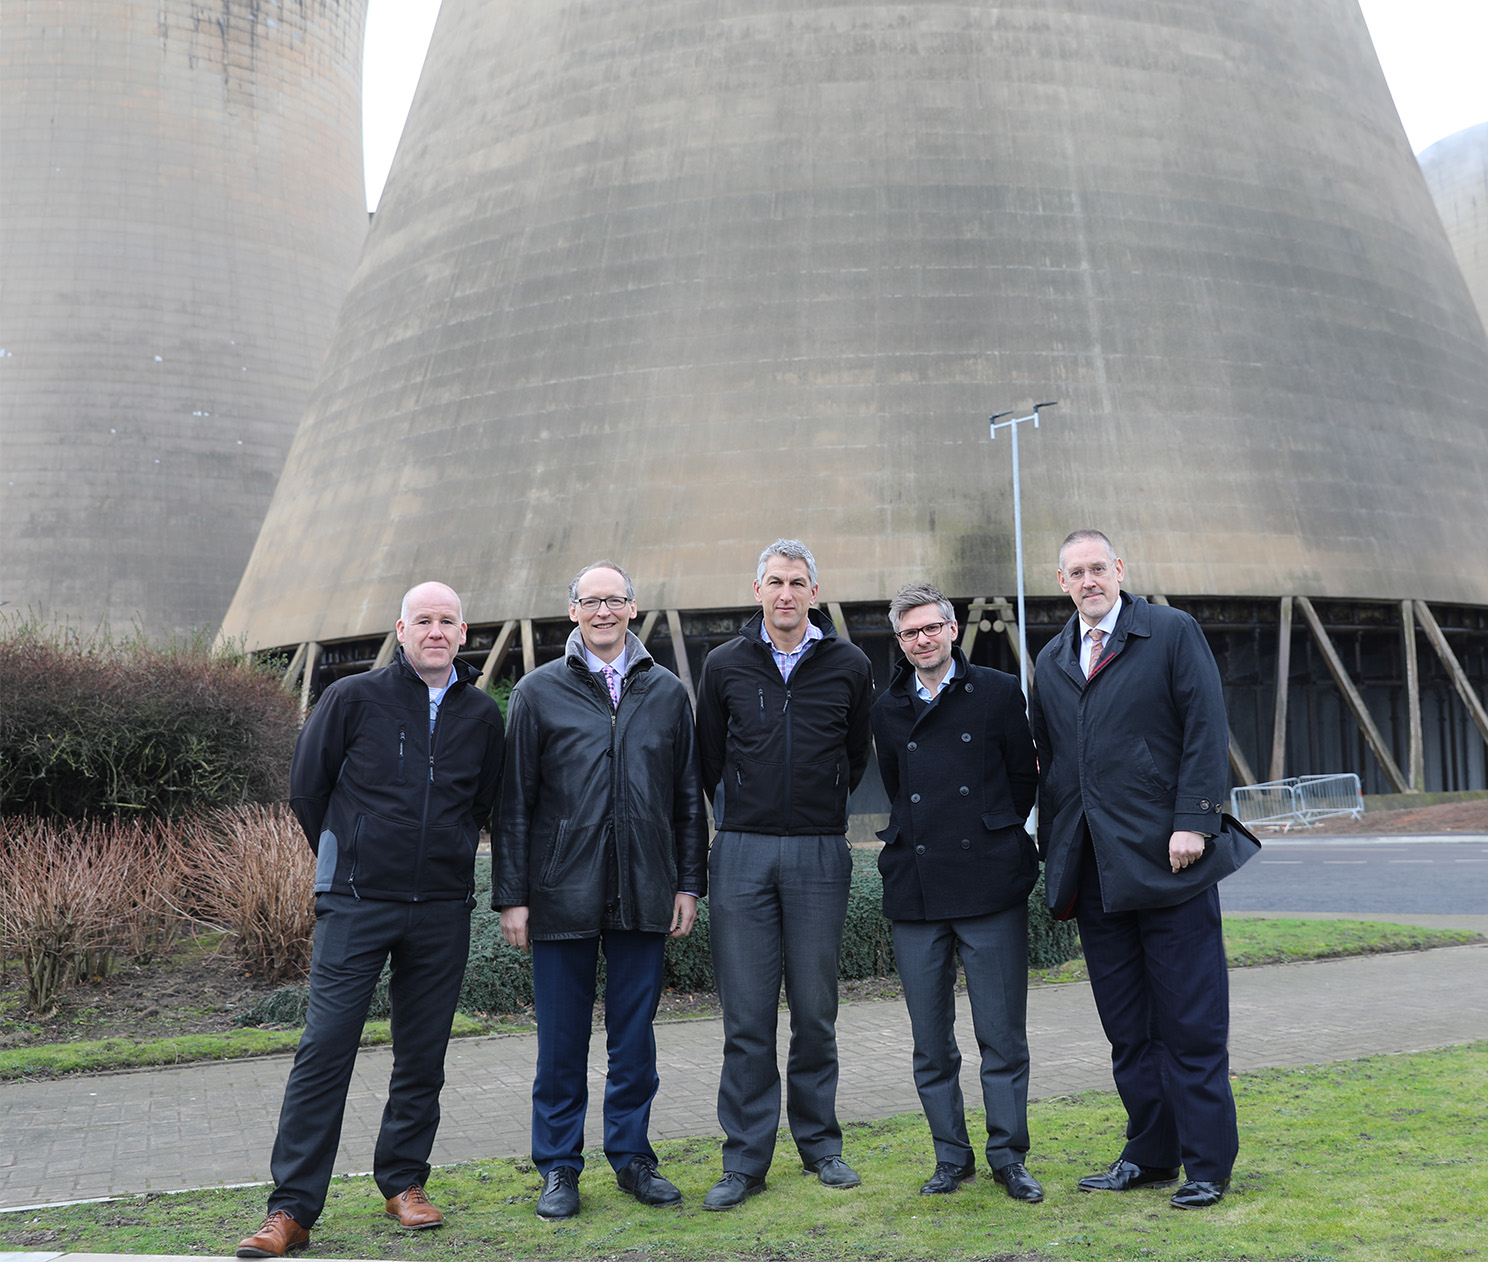 Steve Drayton (Director of Innovation, Drax),  Dr Neville Hargreaves (VP Waste to Fuels, Velocys), Brian Greensmith (Drax), Richard Gwilliam (Drax), Martin Hopkins (Velocys)